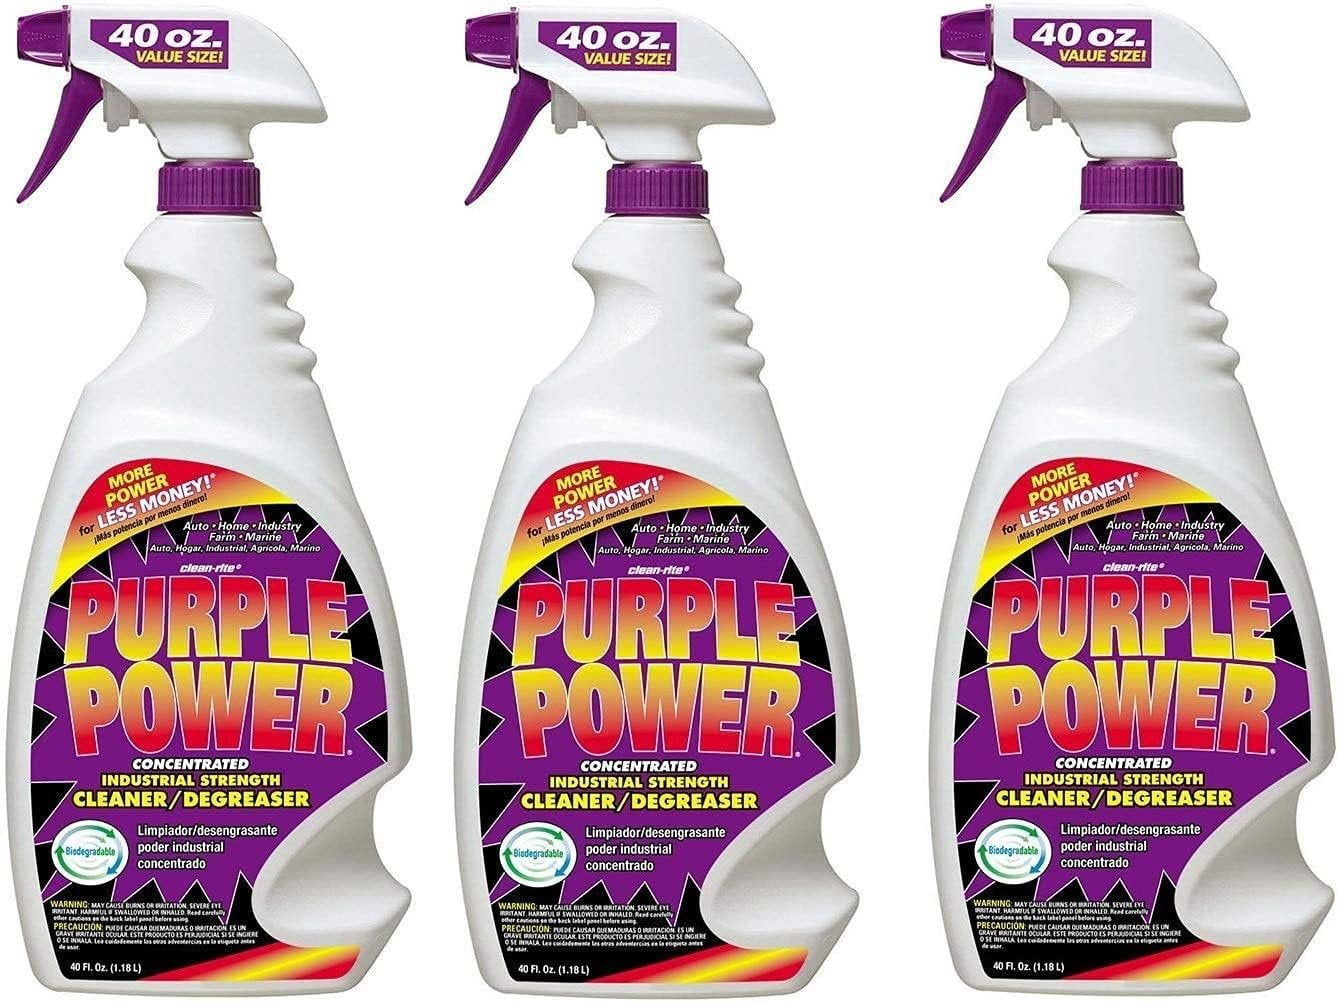 1) CASE OF PURPLE POWER DEGREASER - Jeff Martin Auctioneers, Inc.